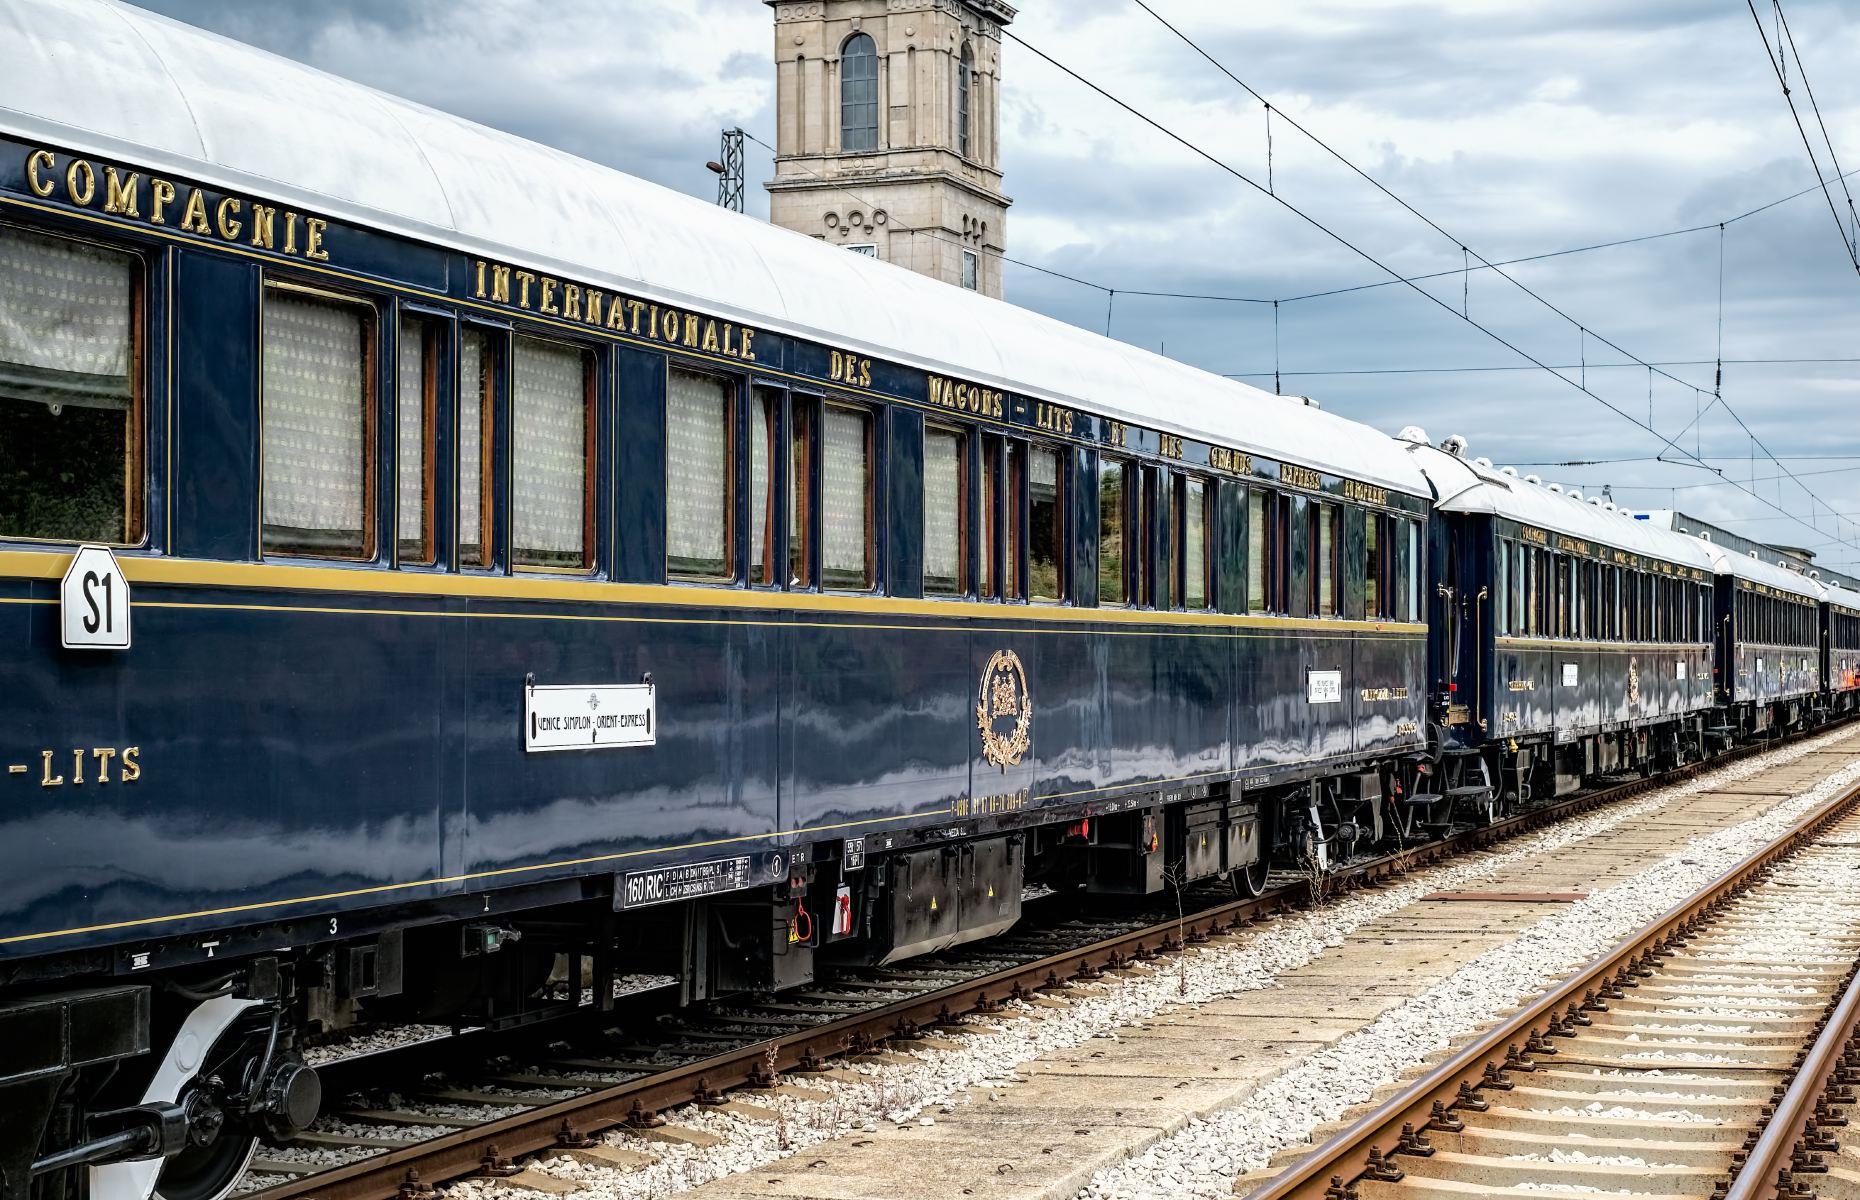 <p>With an aim to evoke a sense of romance and grandeur, the lovingly restored <a href="https://www.belmond.com/trains/europe/venice-simplon-orient-express/">Venice Simplon-Orient-Express</a> makes passengers feel like royalty. Connecting London and Verona via Paris, it’s a chance to see rolling Italian countryside and iconic European cities. In 2022, the Orient Express will also extended its schedule into December (typically it only runs from March until November), making it possible for travelers to enjoy Europe's most beautiful winter landscapes and Christmas markets. </p>  <p><a href="https://www.loveexploring.com/galleries/86683/the-worlds-most-scenic-train-journeys-that-dont-cost-a-fortune?page=1"><strong>These beautiful train journeys don't cost a fortune</strong></a></p>